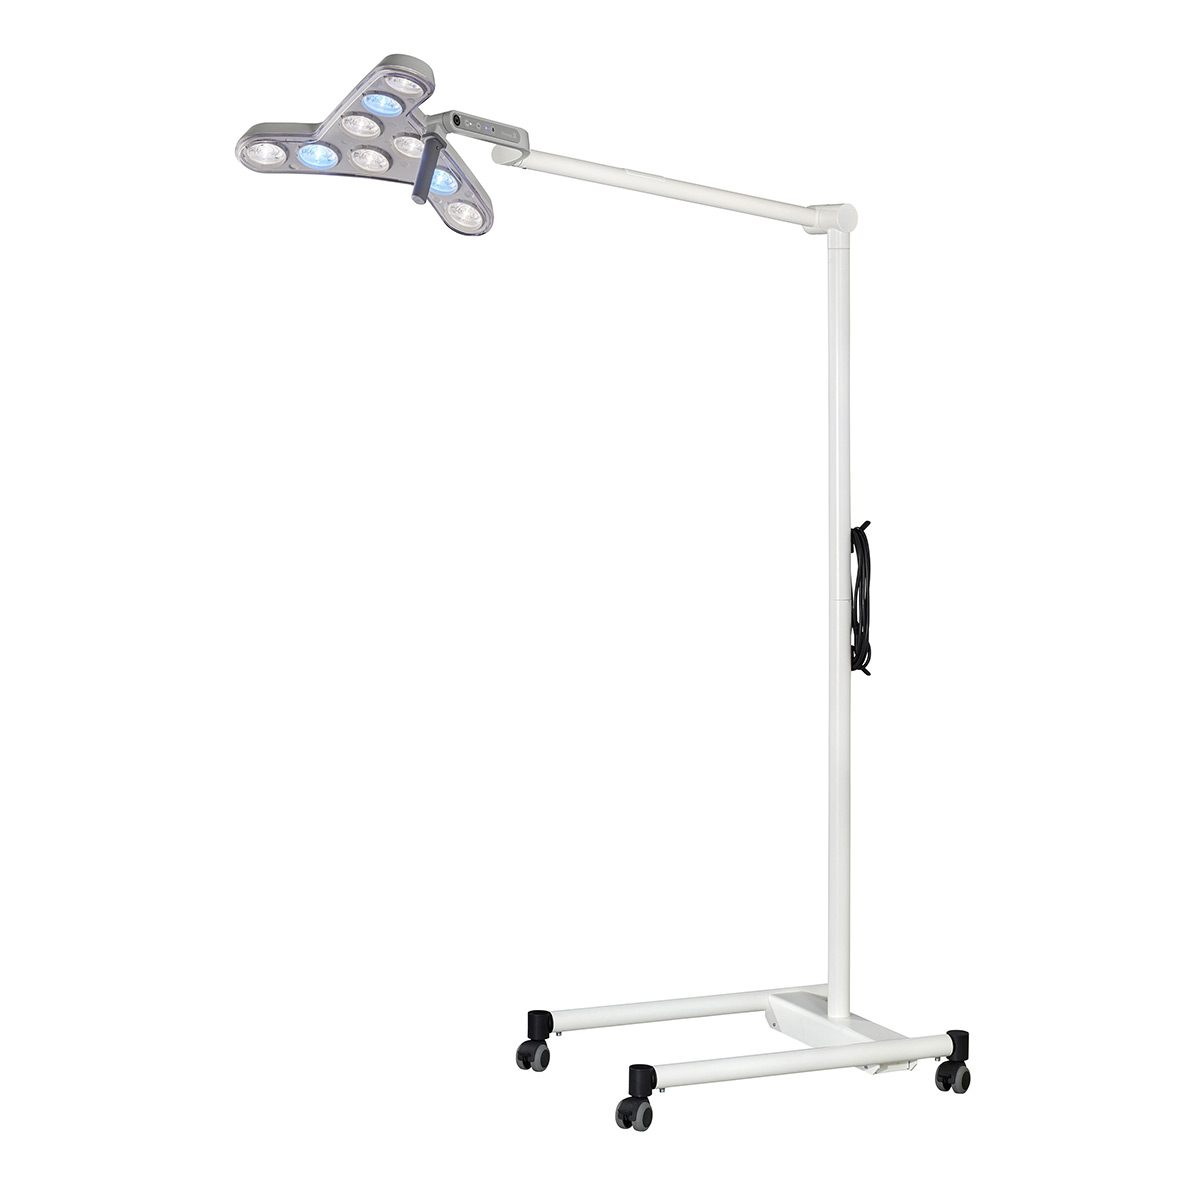 Hospital equipment minor procedure light one touch dimming to 3,000 lux